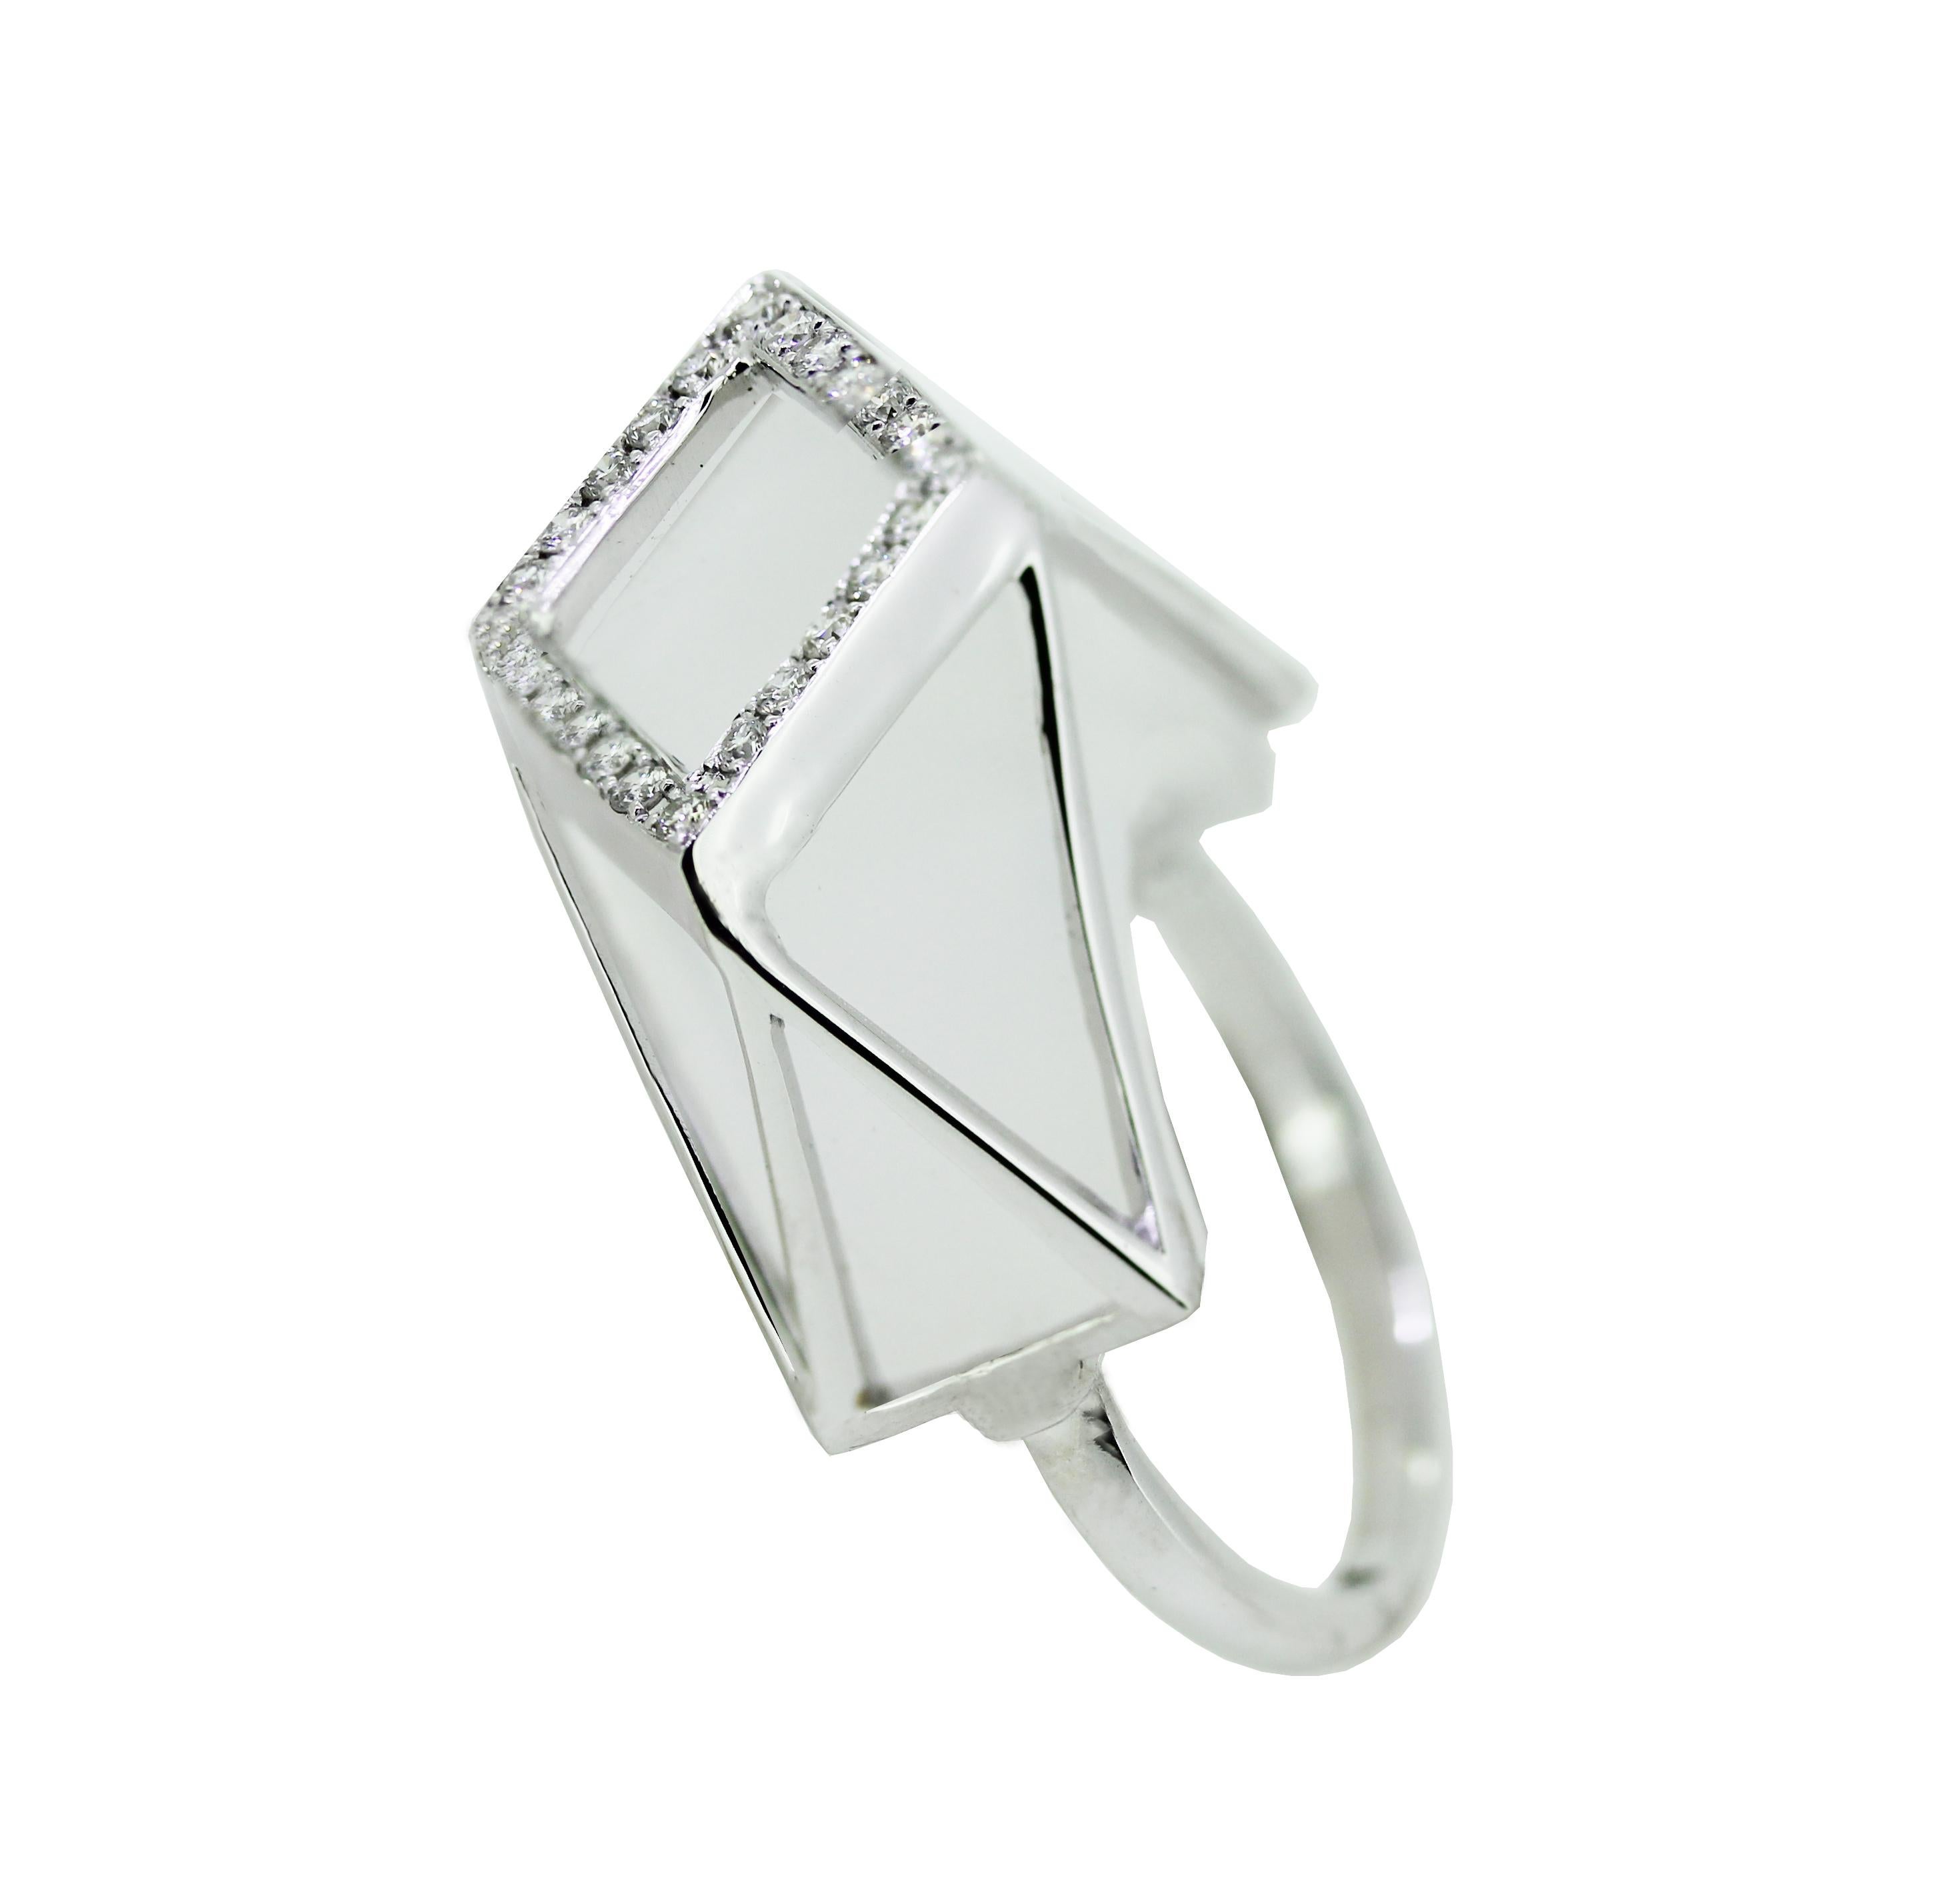 This modern handmade British-London Hallmarked 18 karat white gold ring, set with hand-carved abstract shape rock crystal and diamonds is from MAIKO NAGAYAMA's Haute Couture Collection called 